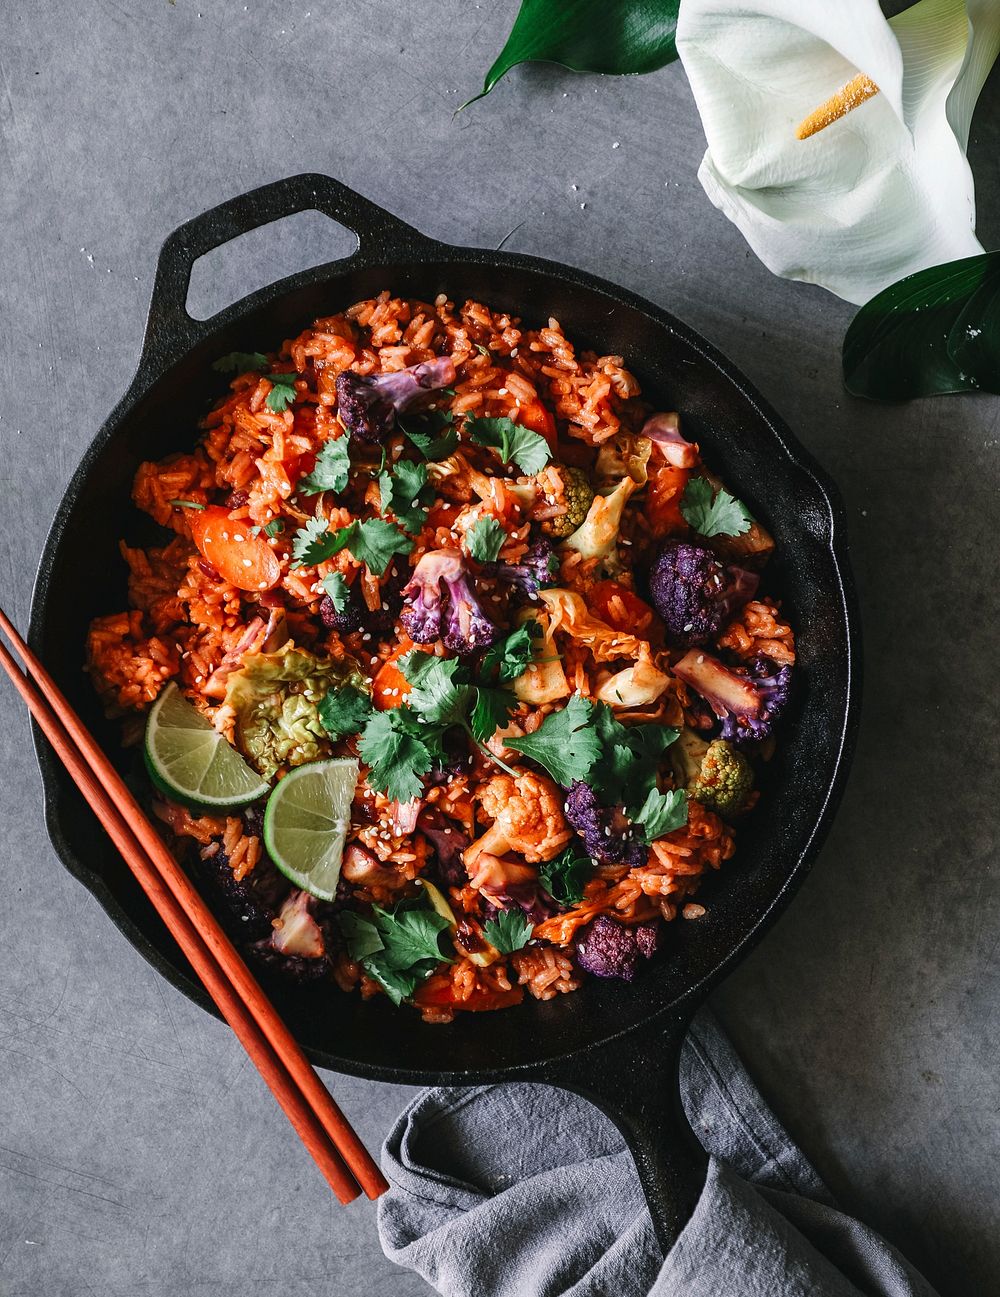 Kimchi fried rice with cilantro, sesame seeds, black pepper, and lime juice